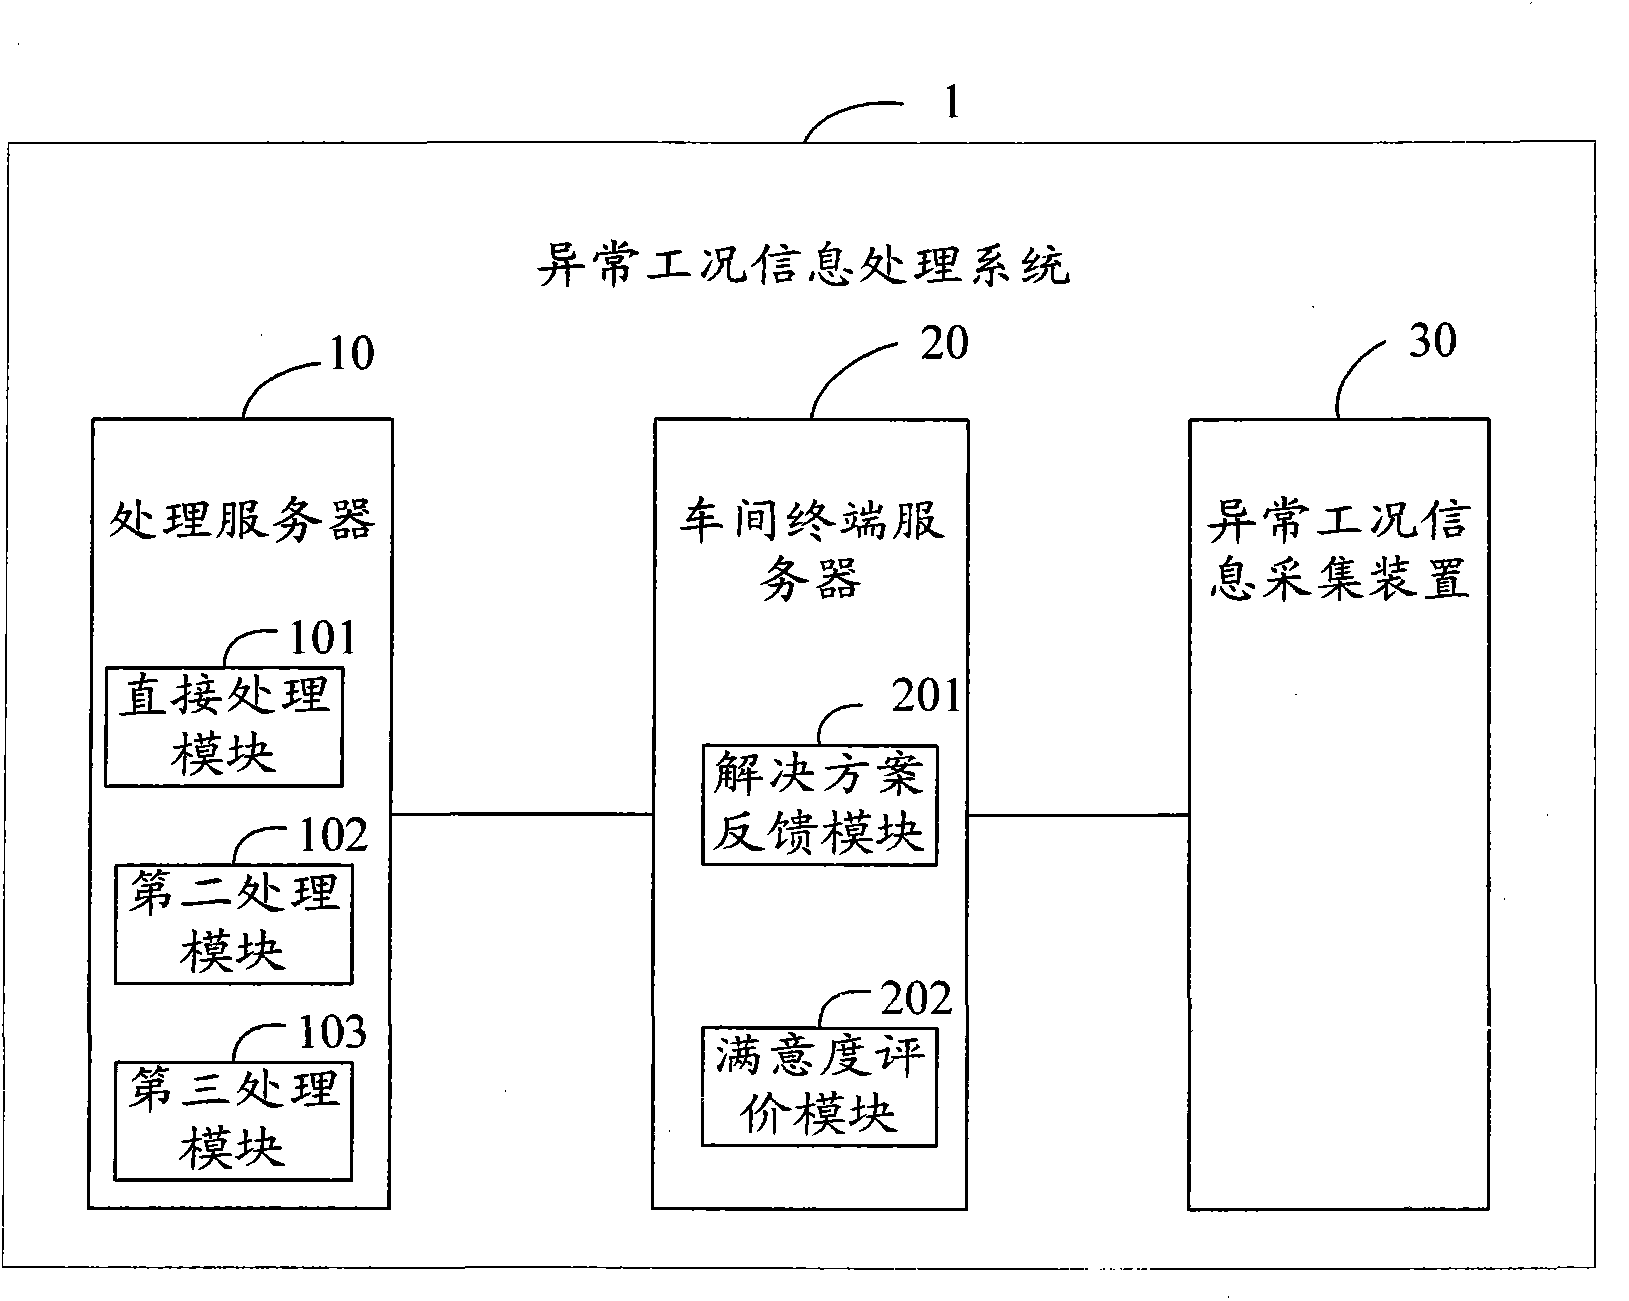 Abnormal working condition information processing system and method